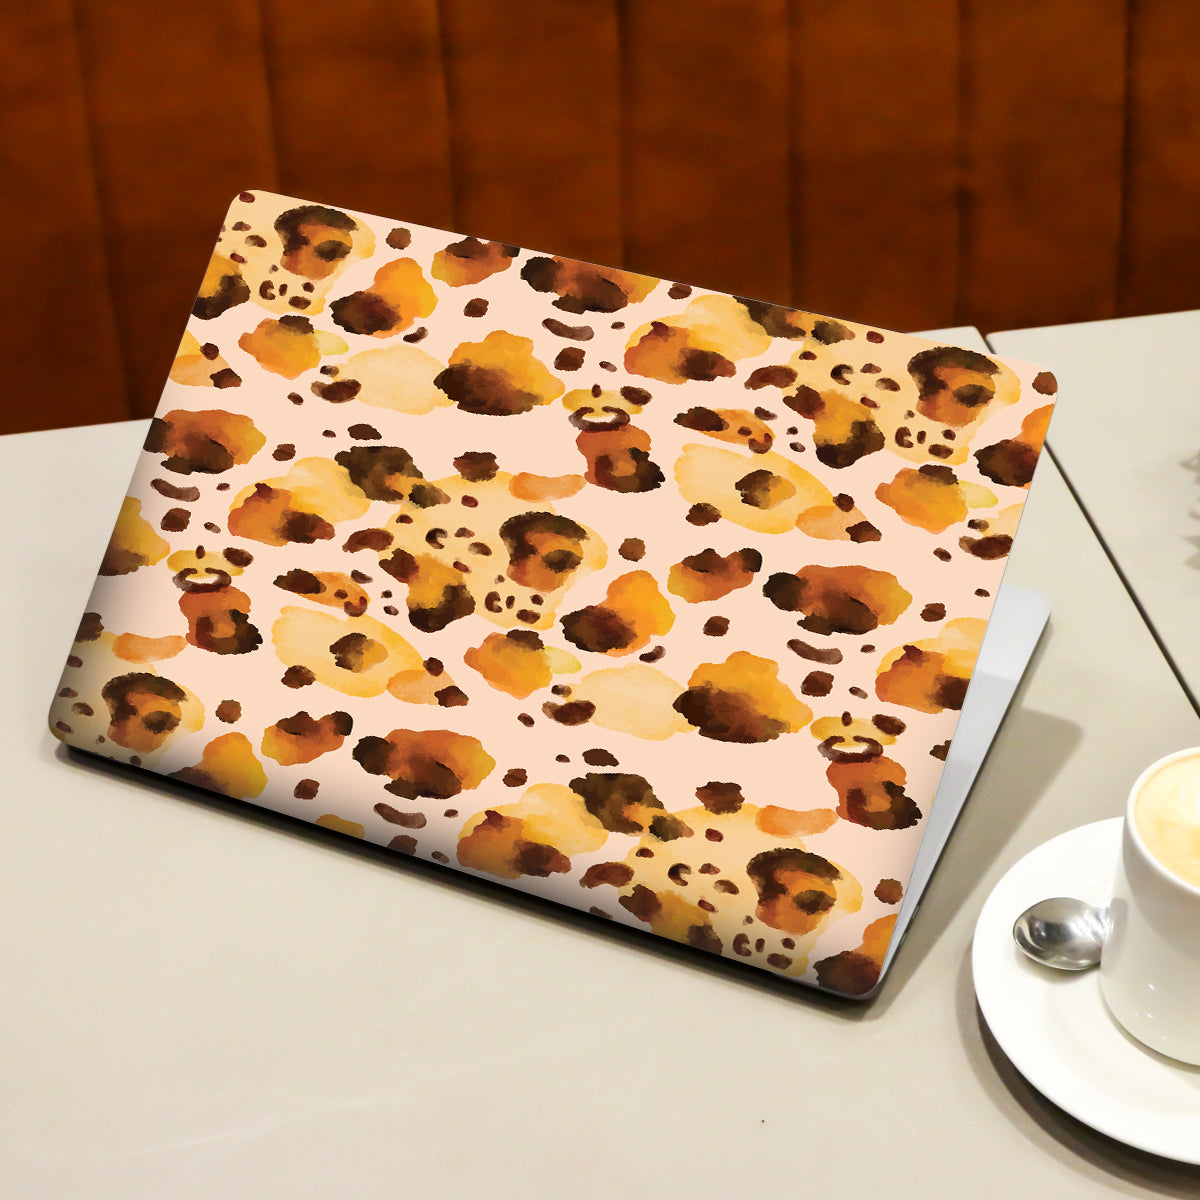 Brown Spotted Laptop Skin